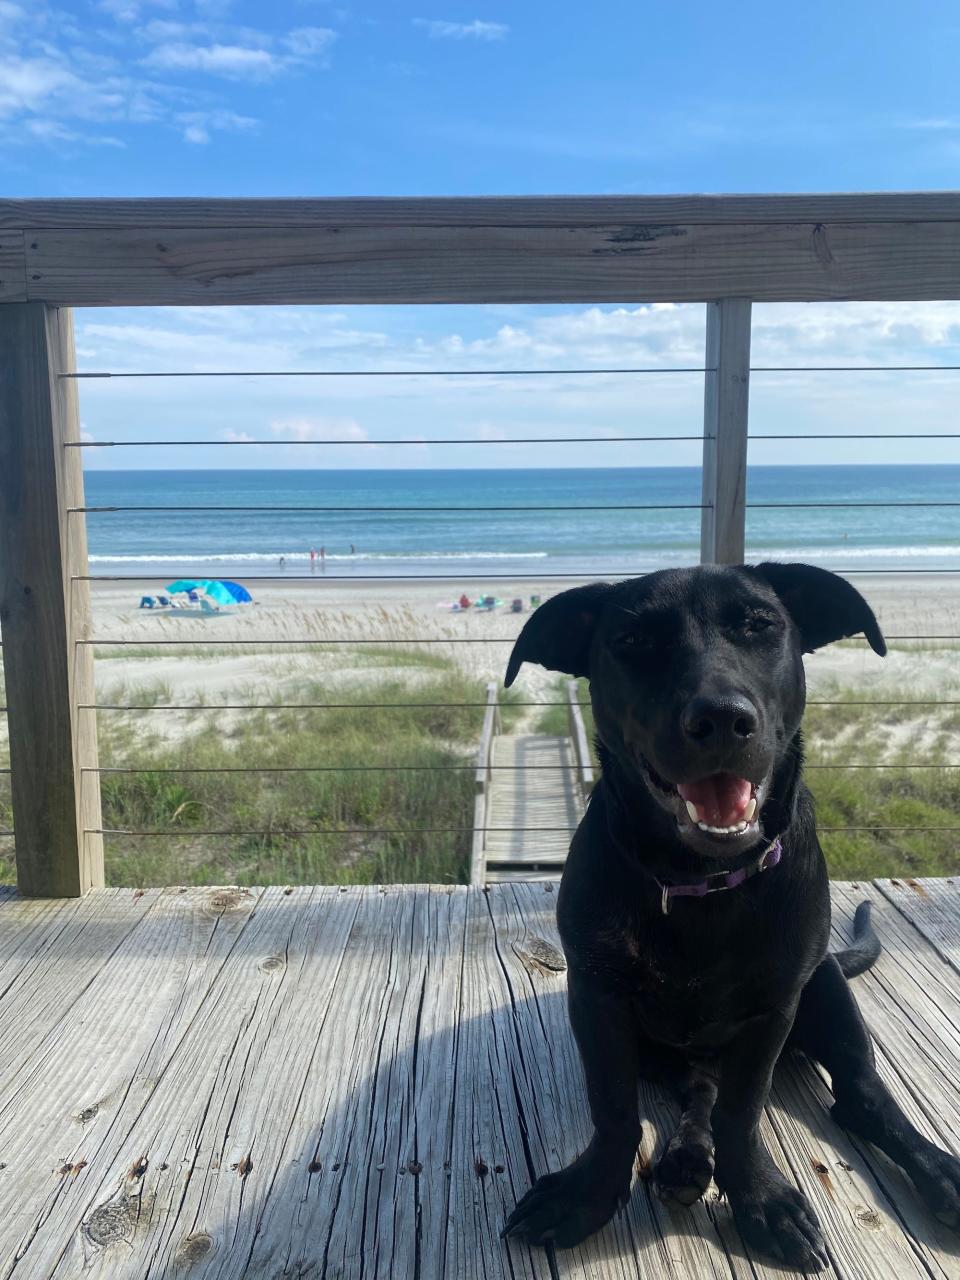 A dog smiles on a patio in front of the ocean.